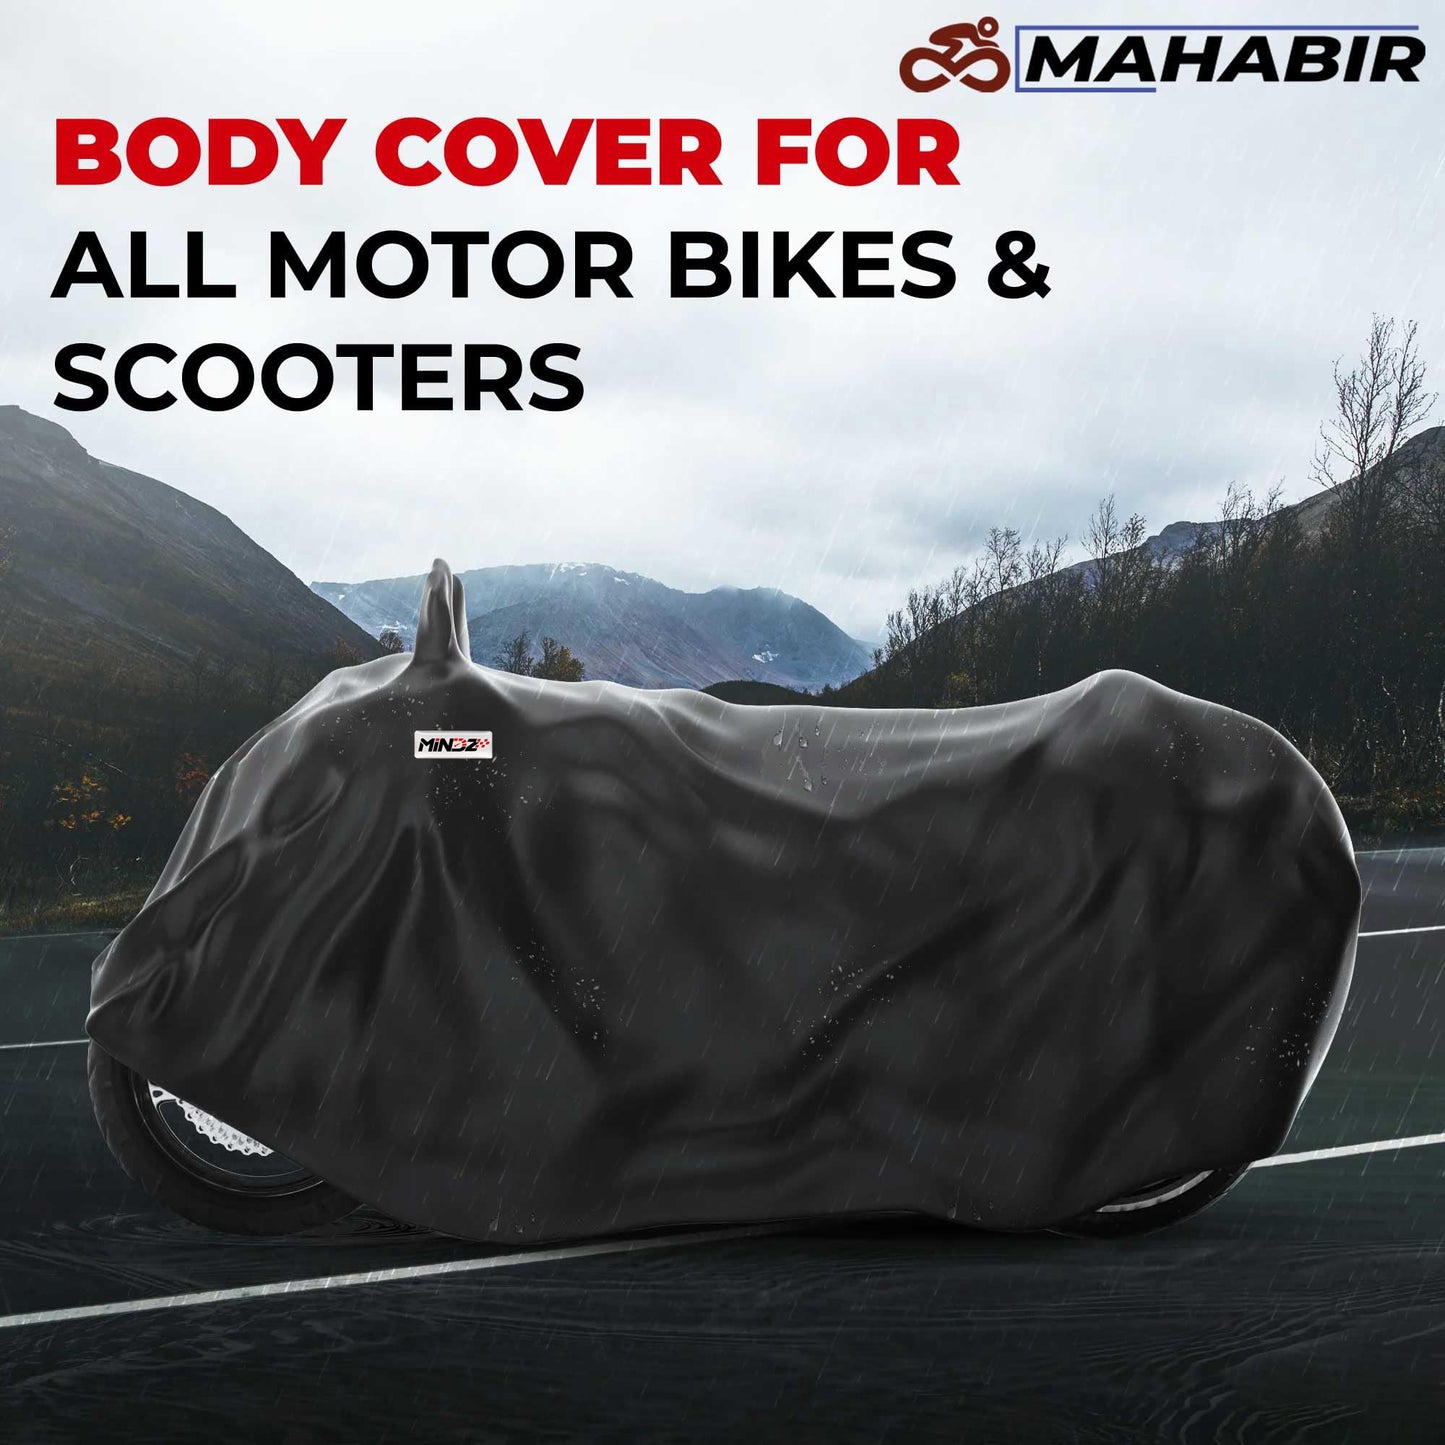 BODY COVER FOR FZ 25